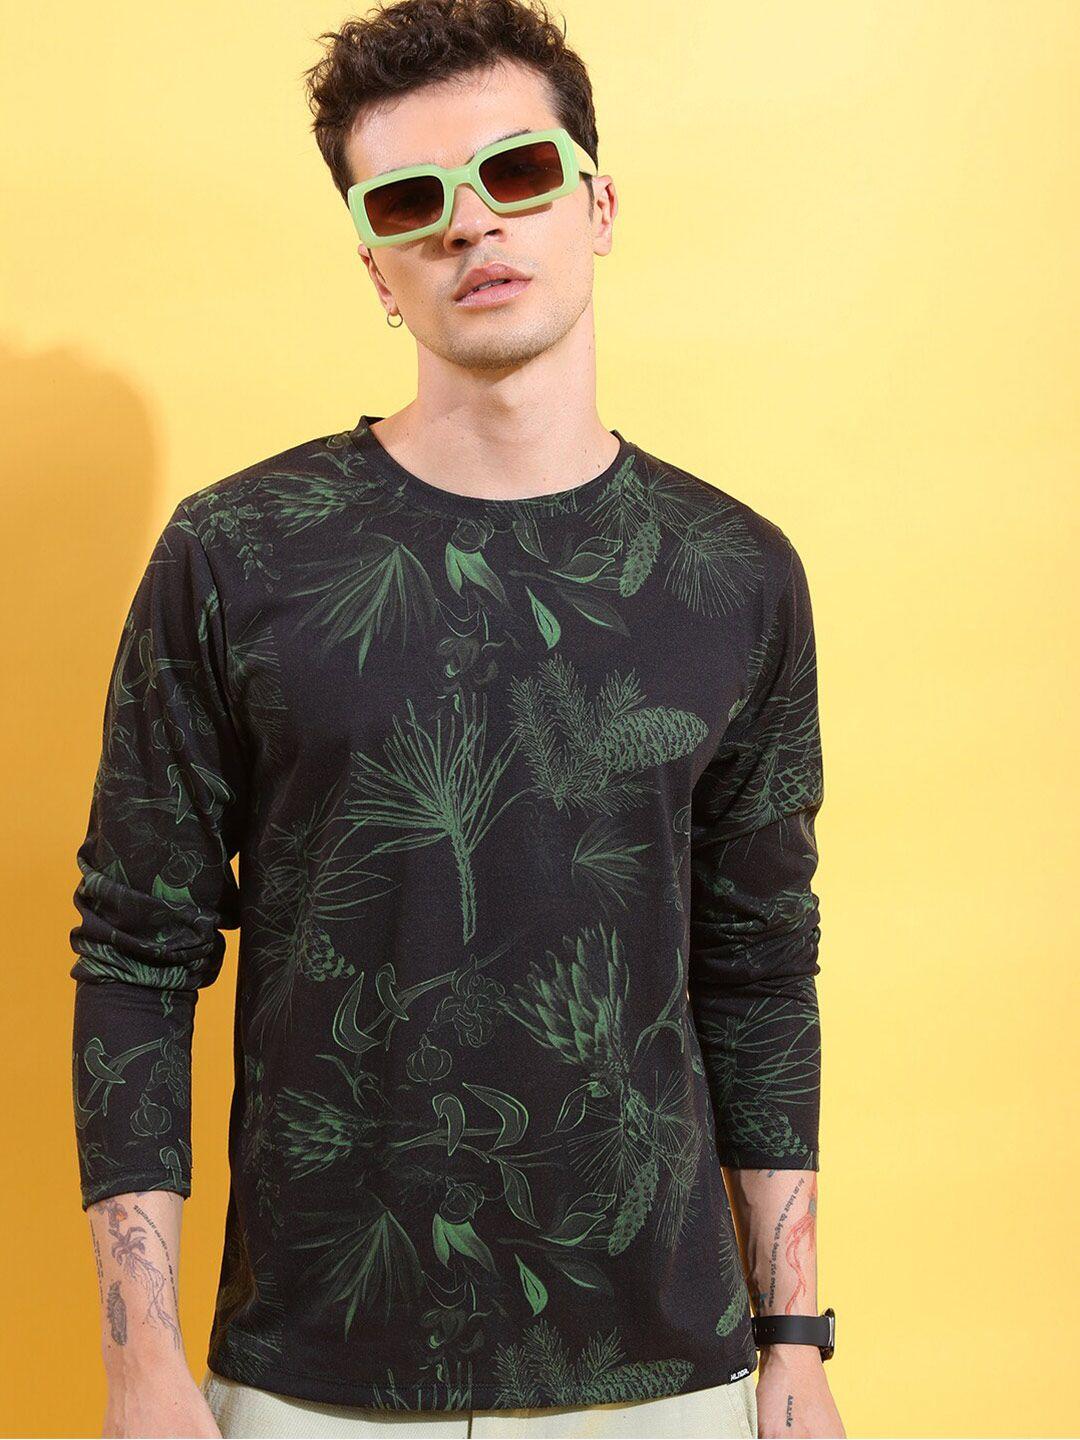 highlander black & green floral printed relaxed fit t-shirt